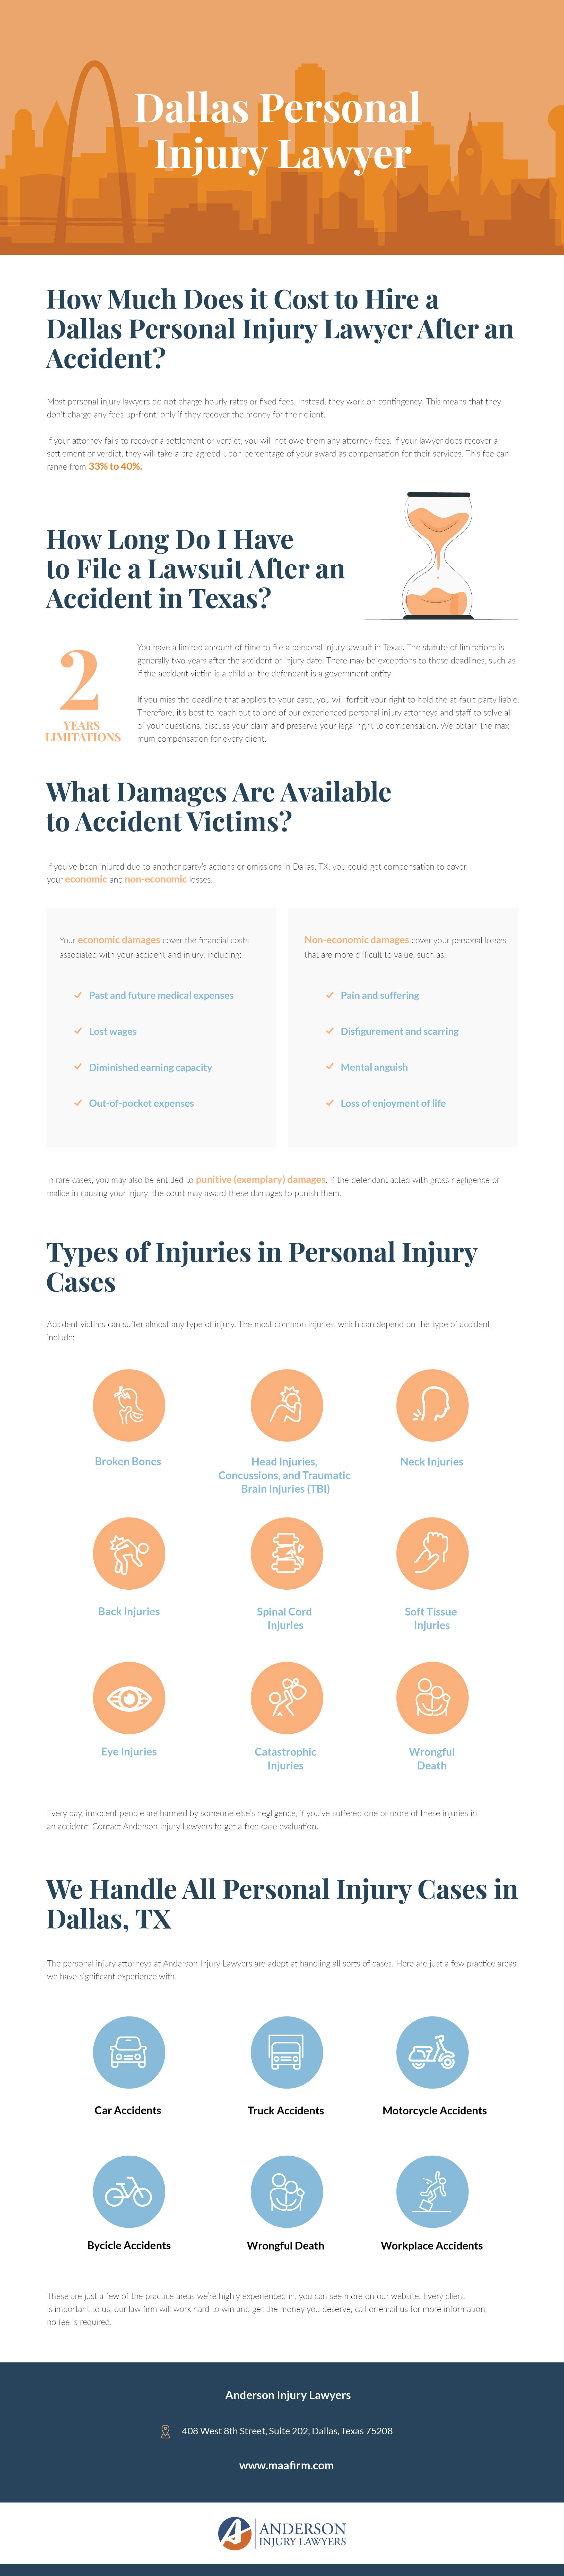 Dallas Personal Injury Infographic